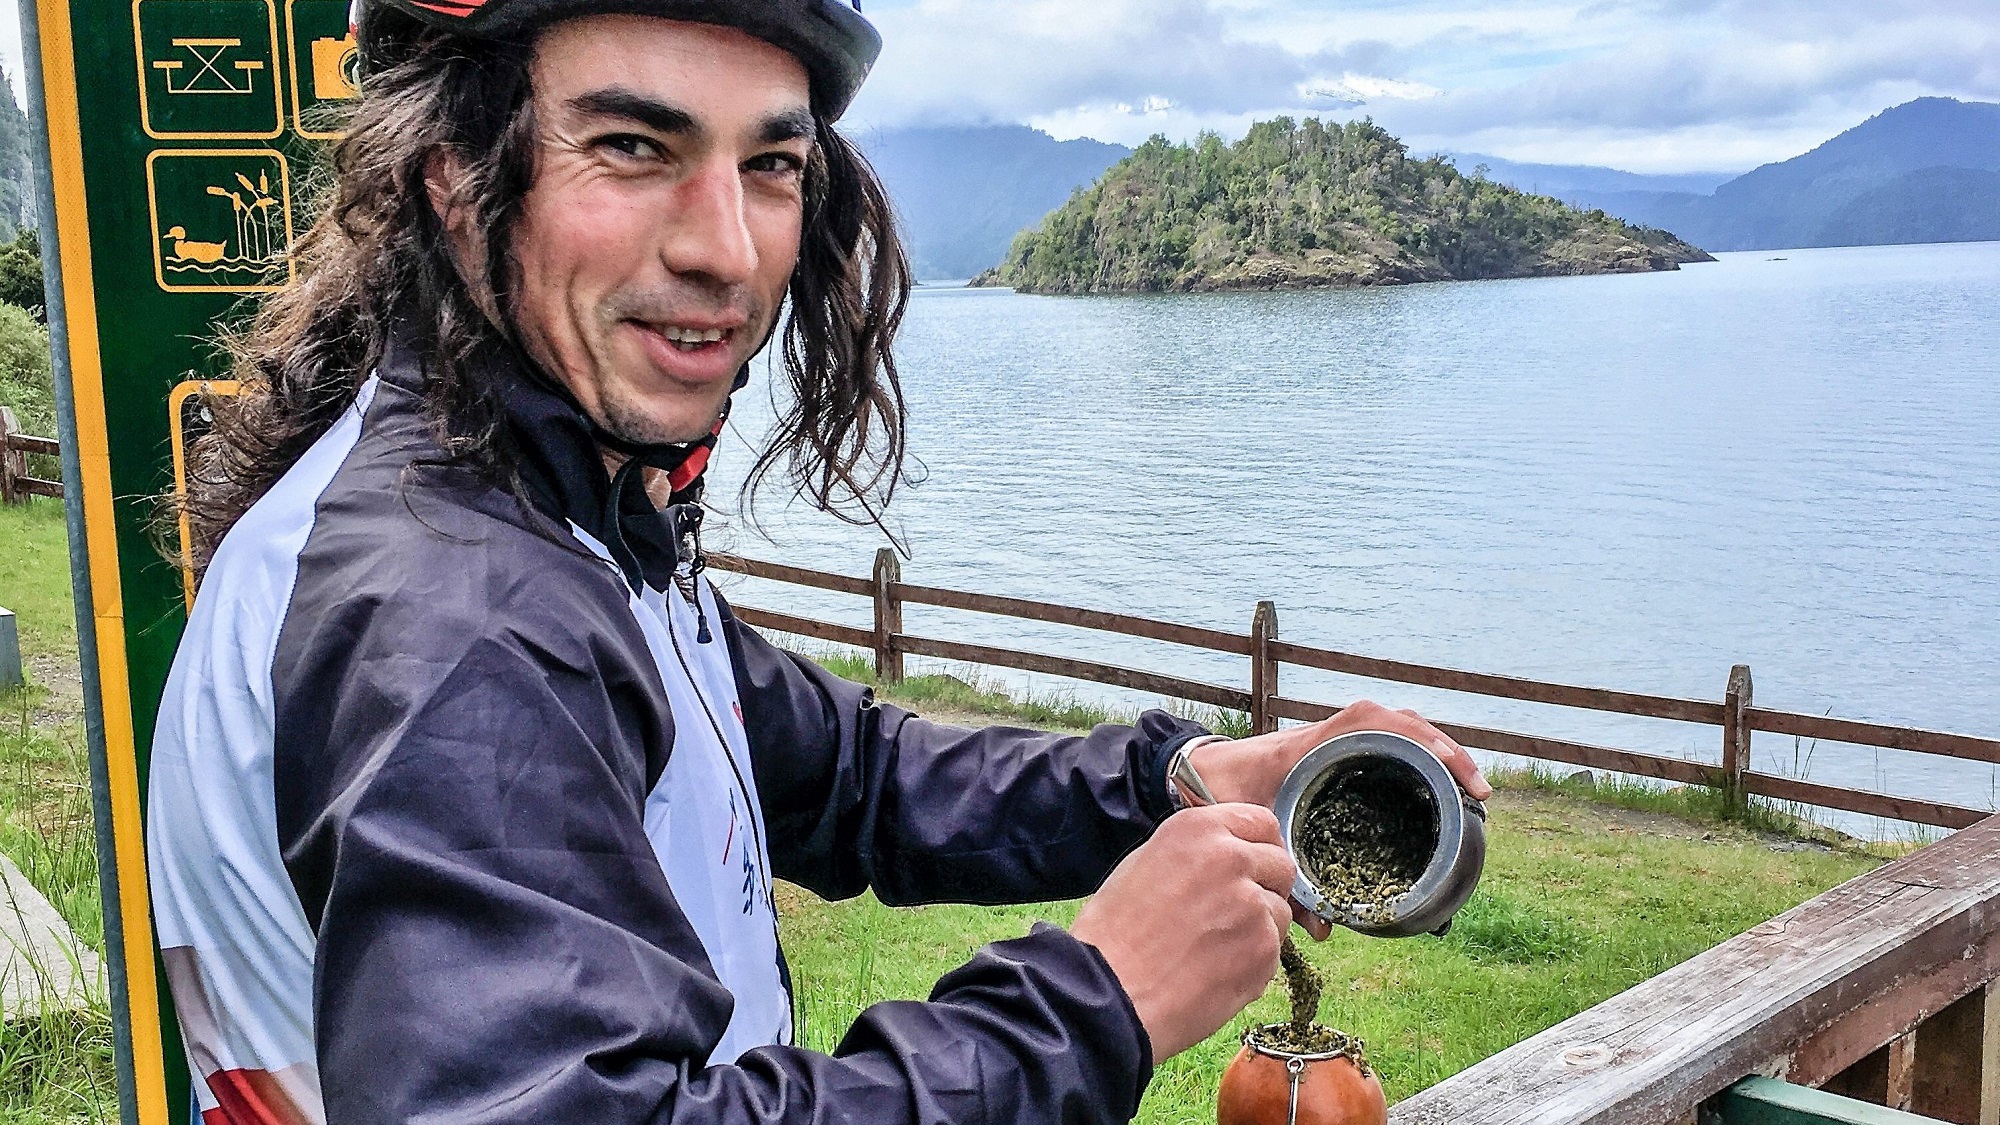 Guide Drinking Mate the National Drink of Argentina 